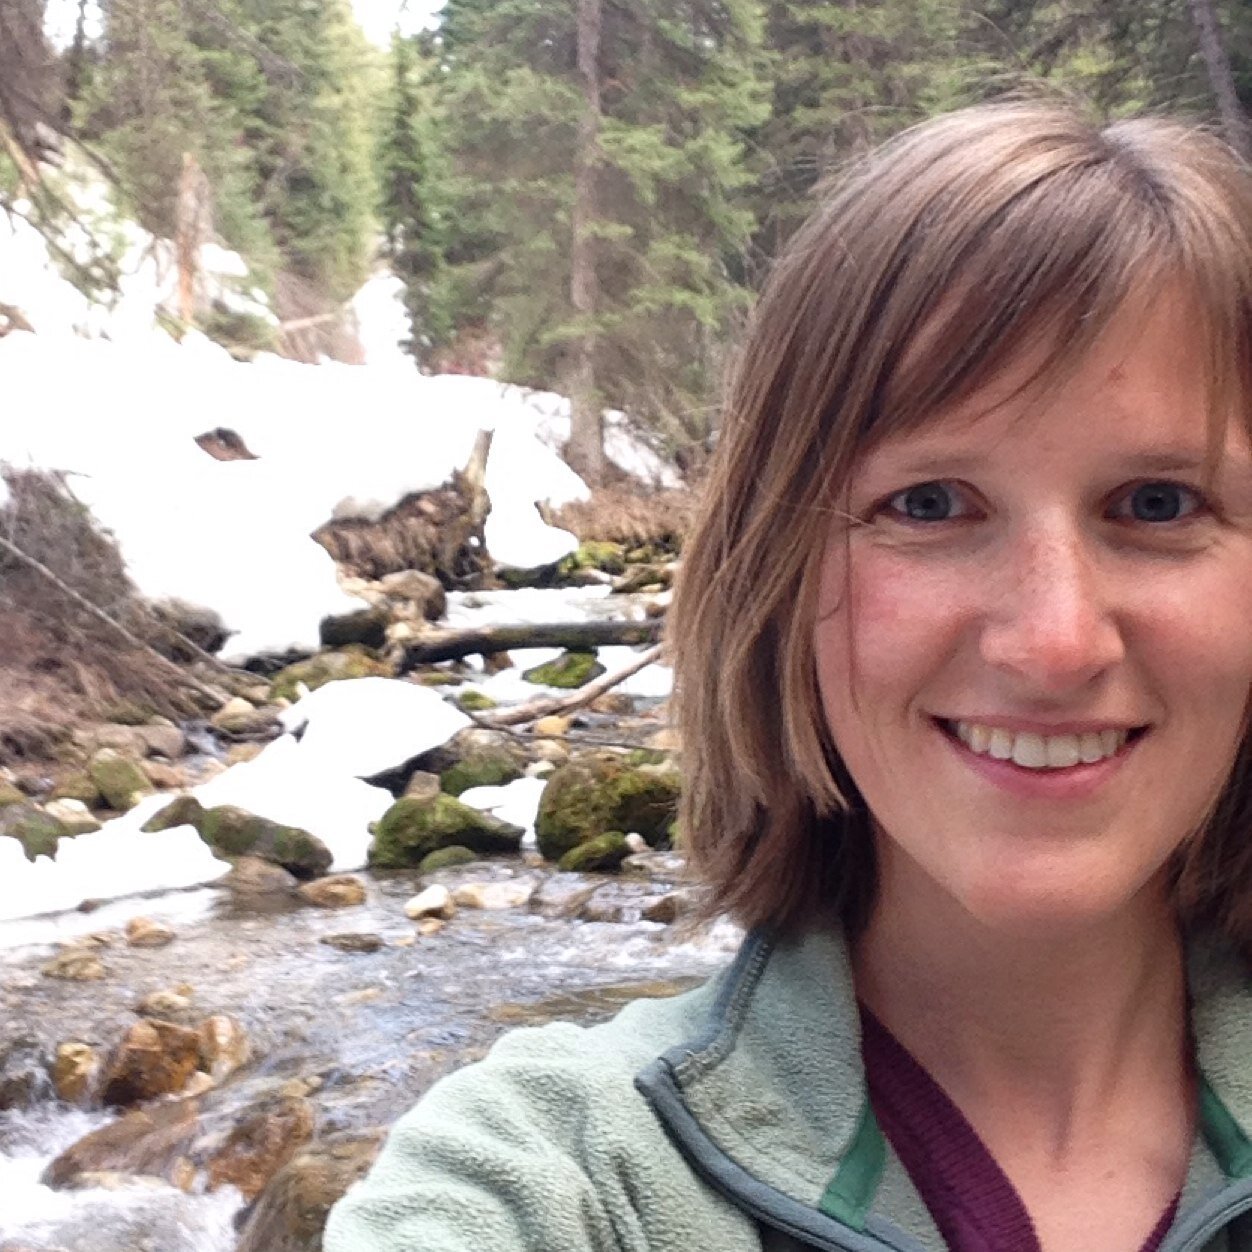 Landscape Ecologist. West coast transplant in the Midwest. Nature lover. Gardener. she/her/hers